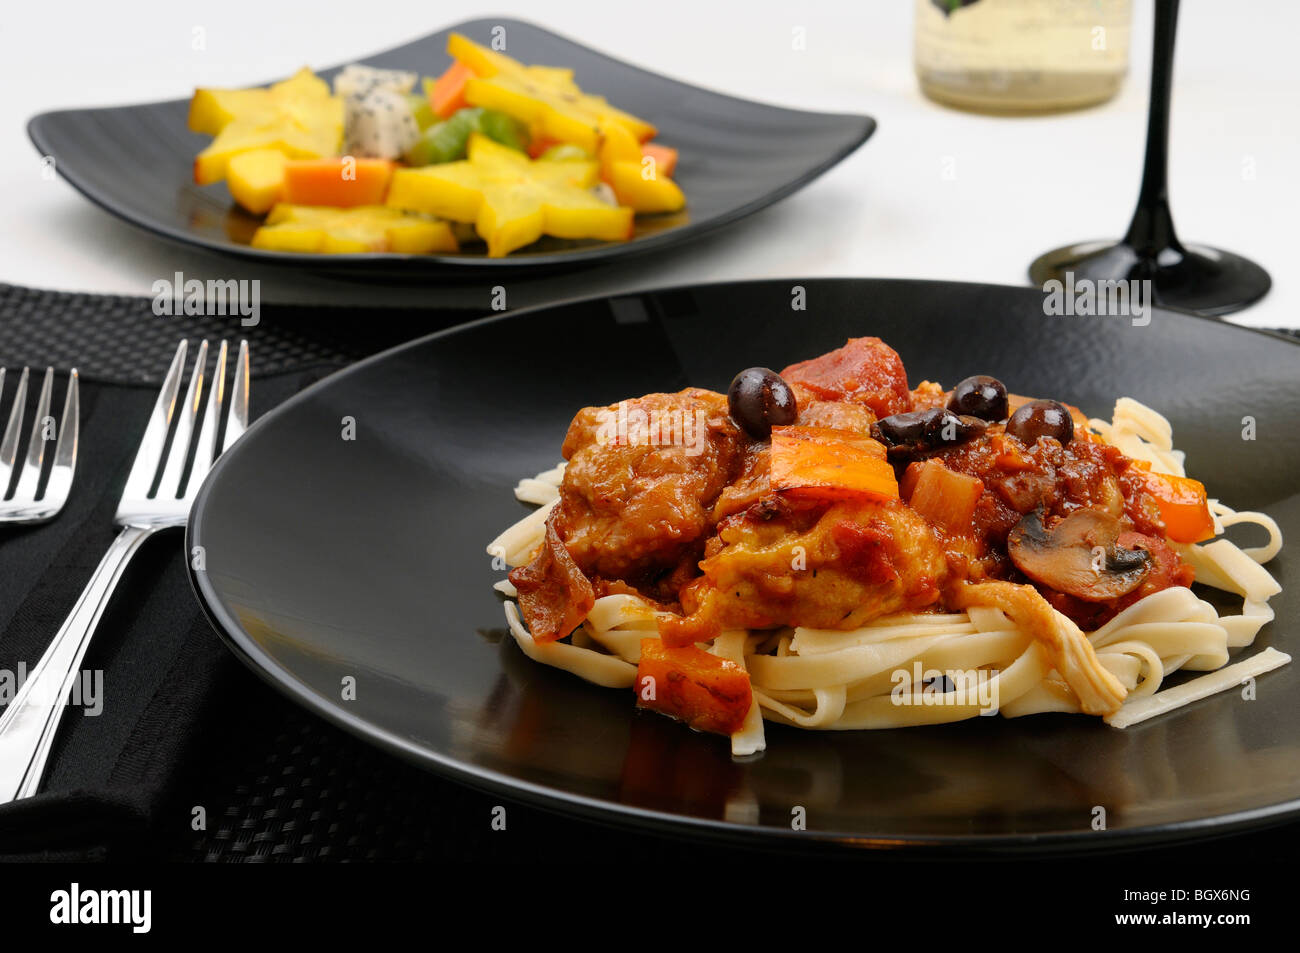 Close up of table setting with plate of Chicken Marengo with fruit salad and white wine Stock Photo